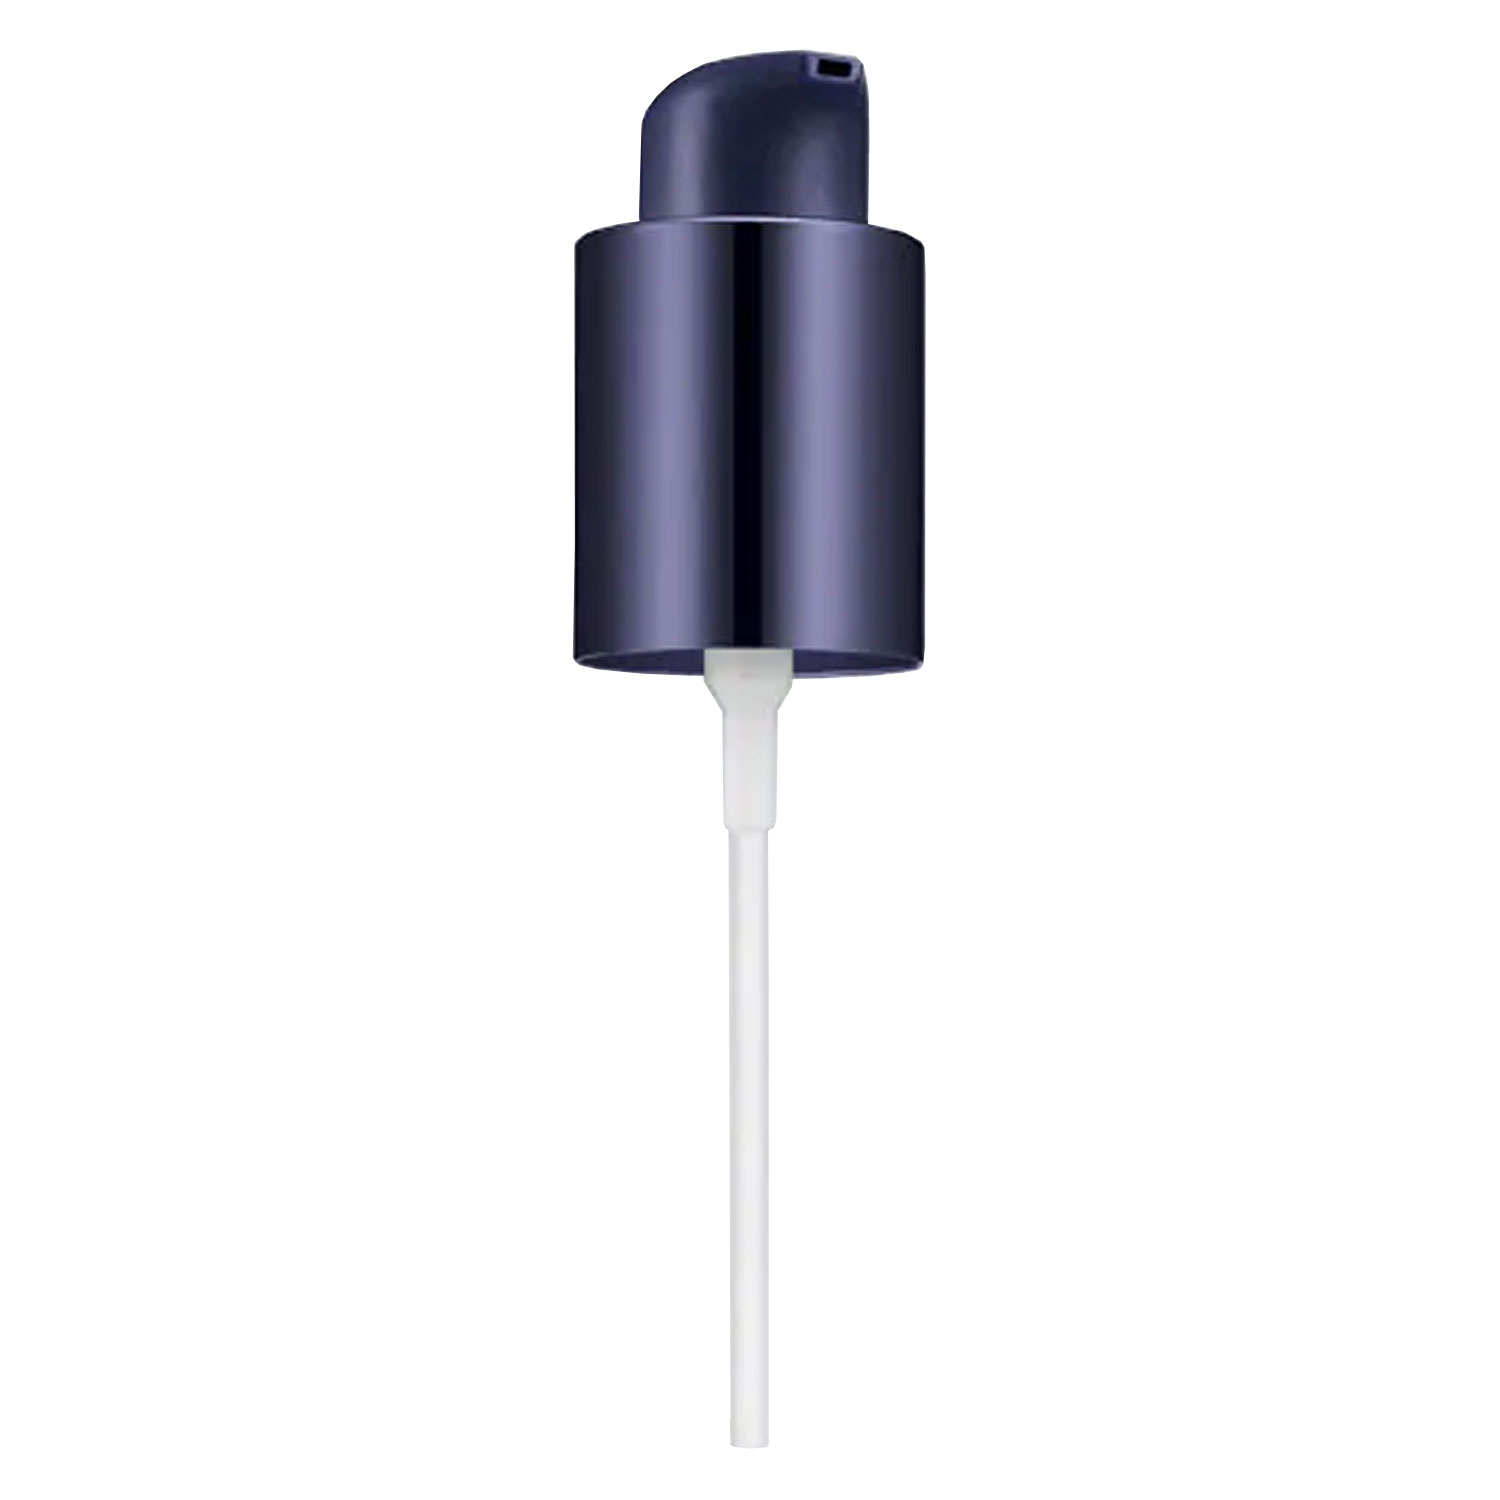 Product image from Double Wear - Stay-in-Place Makeup Pump